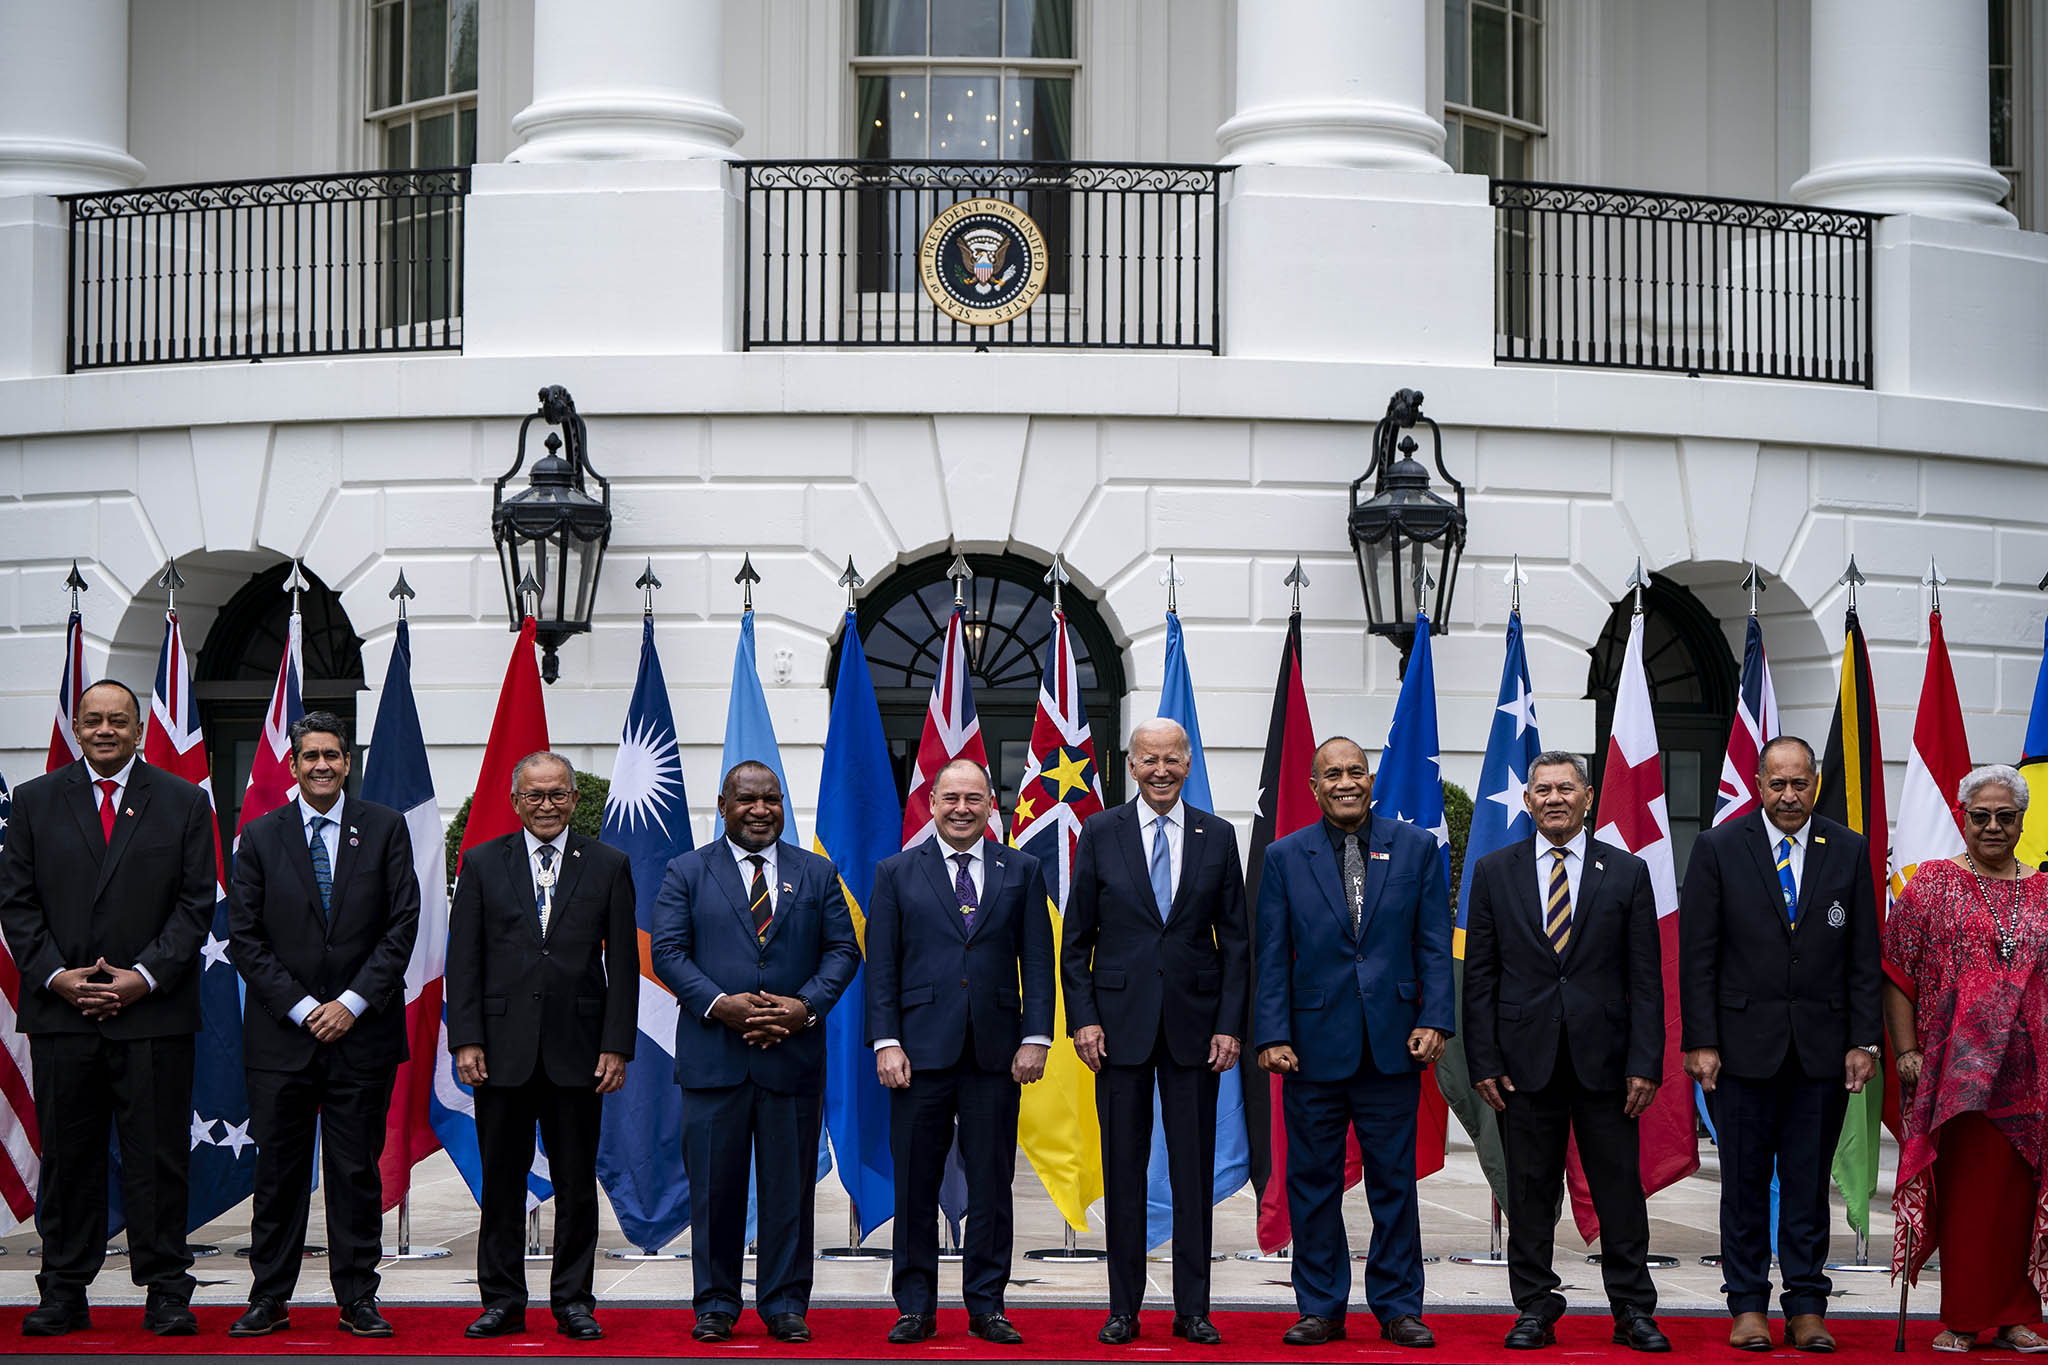 President Joe Biden with Pacific Islands leaders during the Pacific Islands Forum at the White House in Washington, Monday, September 25, 2023. (Haiyun Jiang/The New York Times)